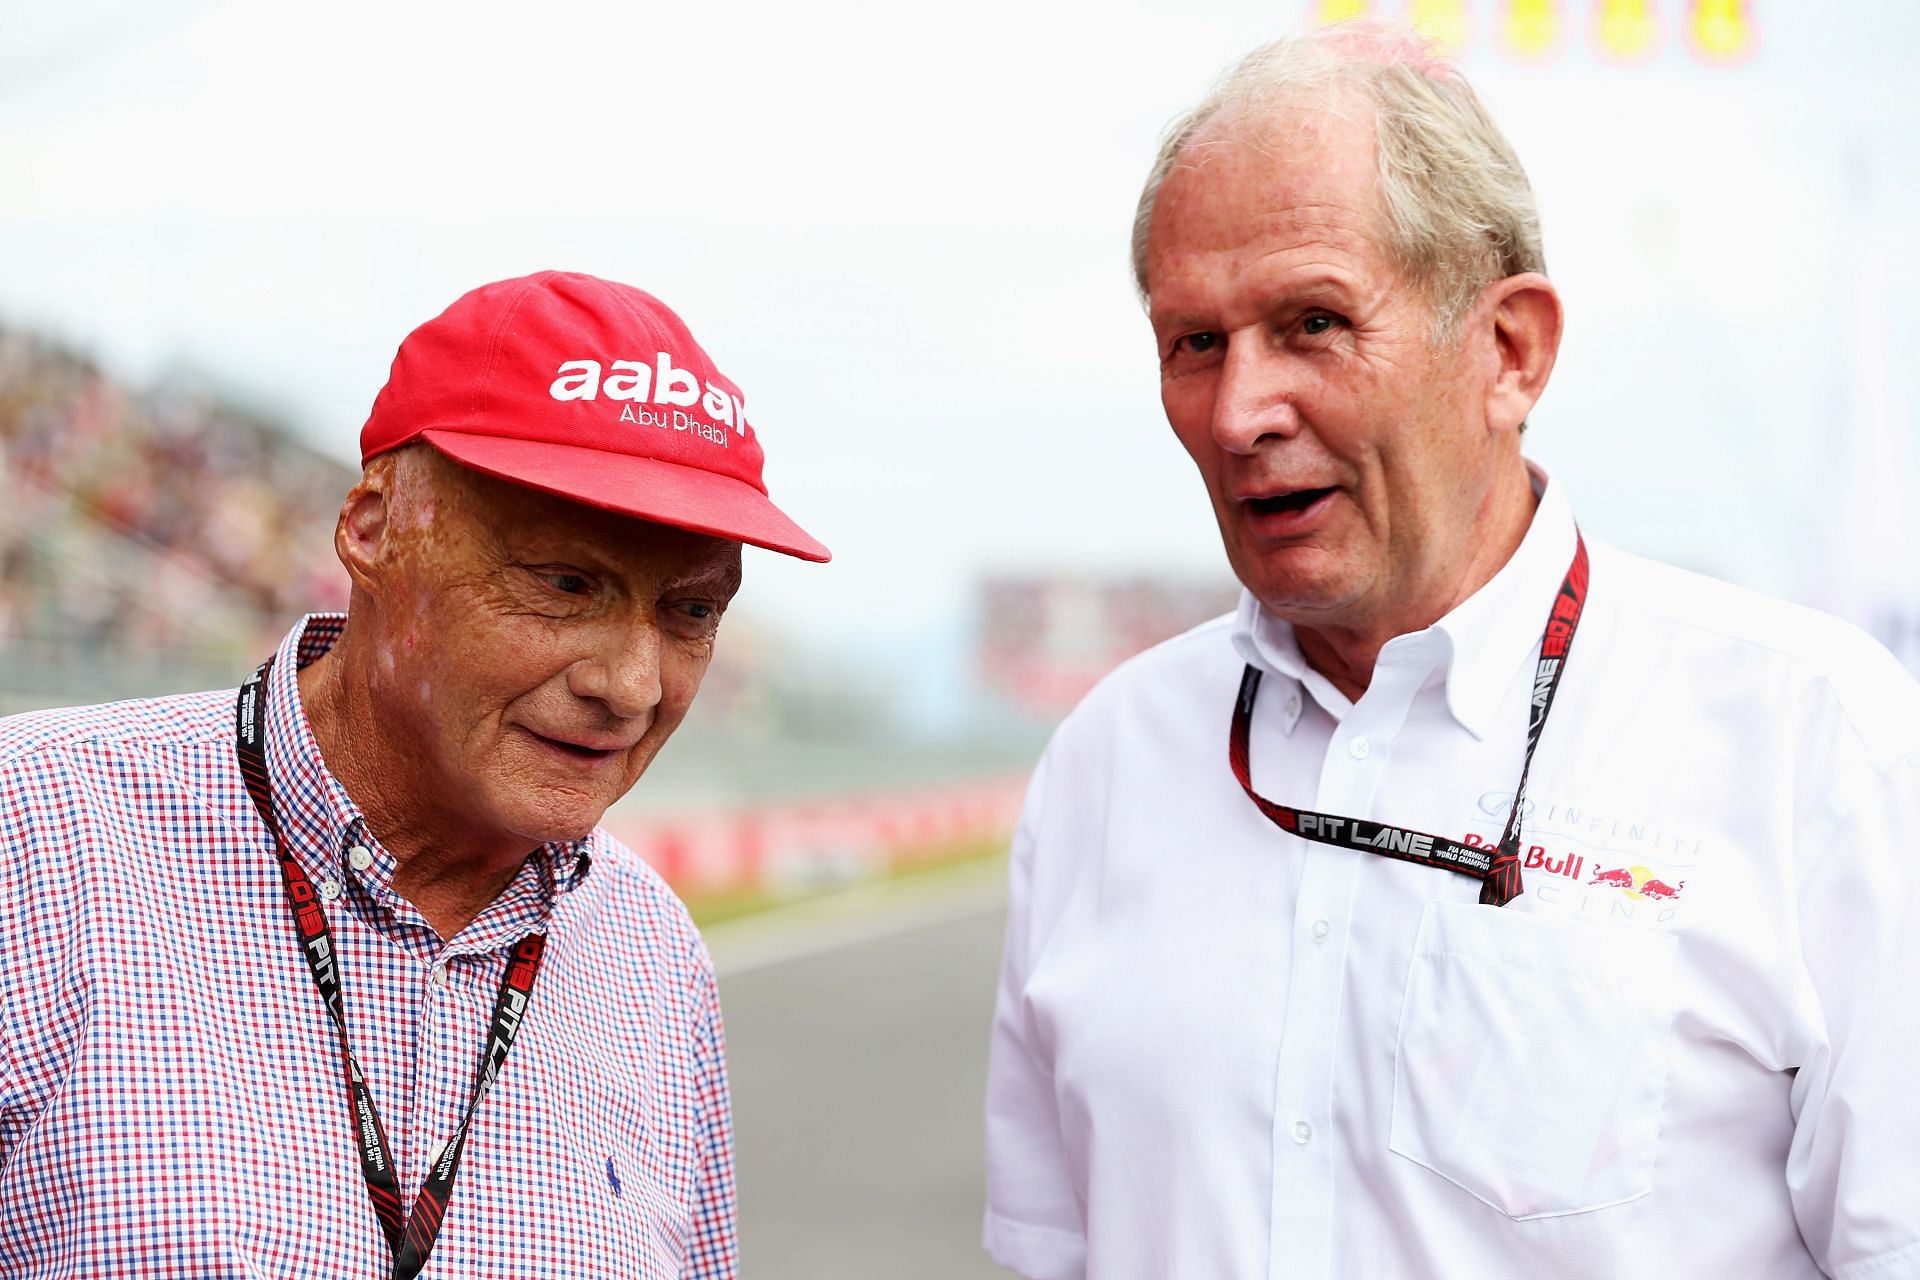 Niki Lauda and Dr. Helmut Marko talk on the grid before a race (Photo by Mark Thompson/Getty Images)